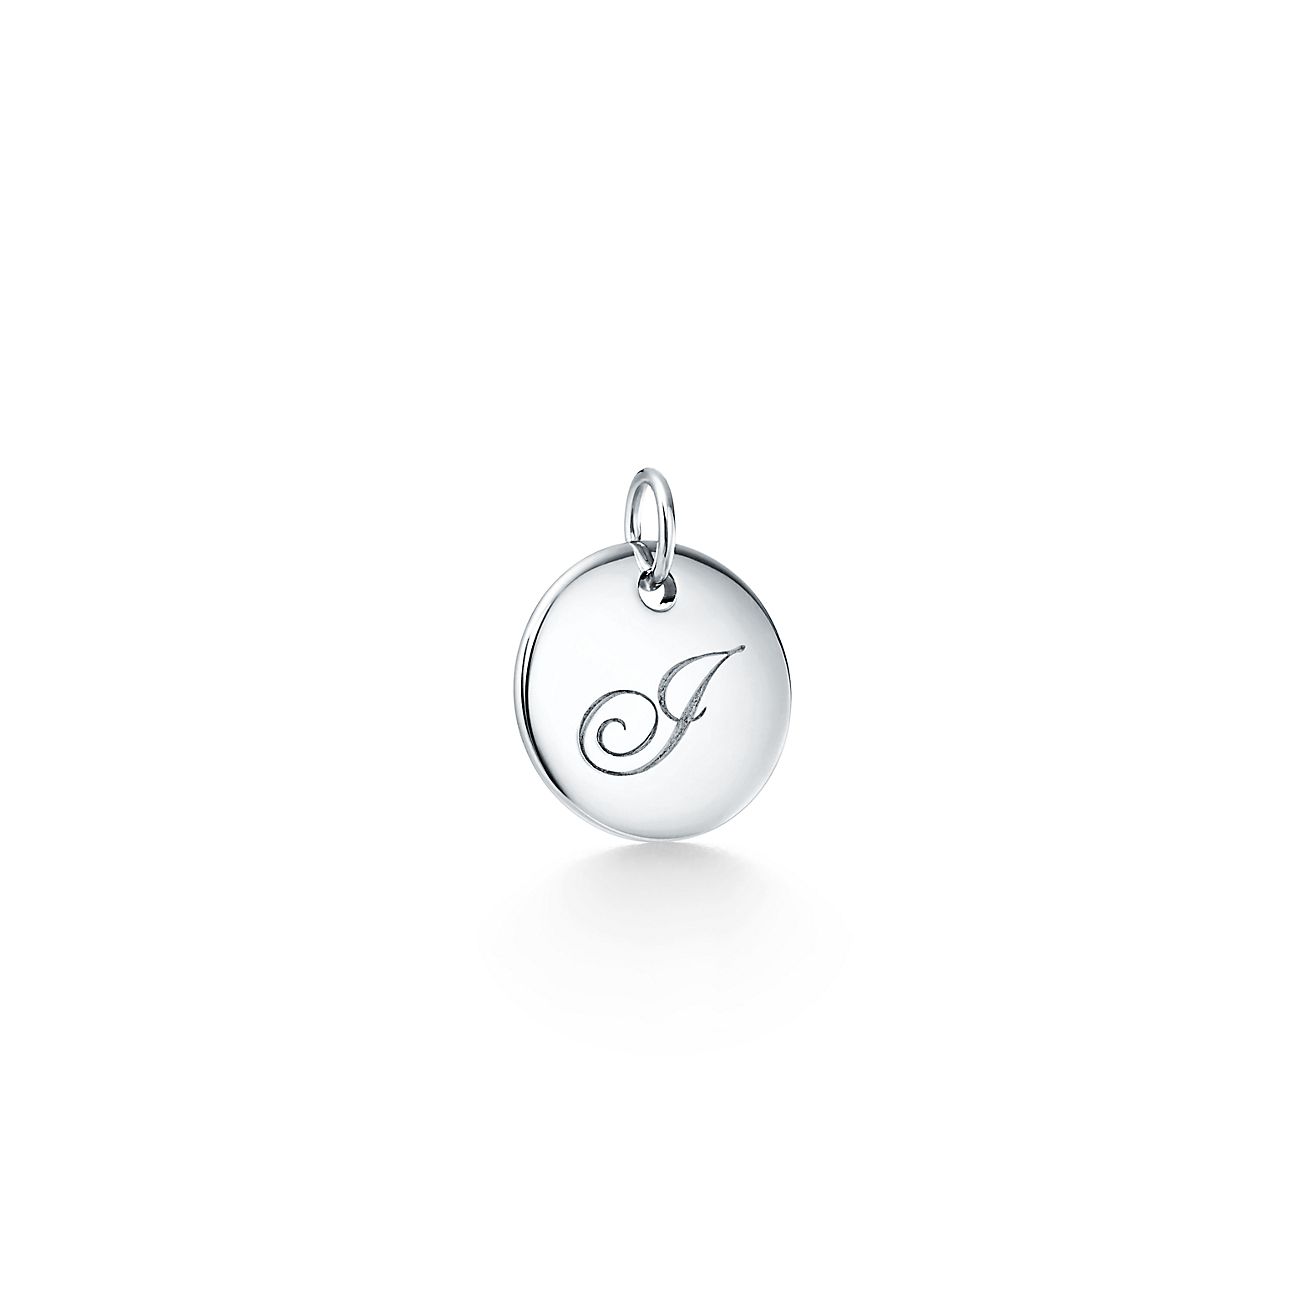 Tiffany Notes J Disc Charm in Silver, A 